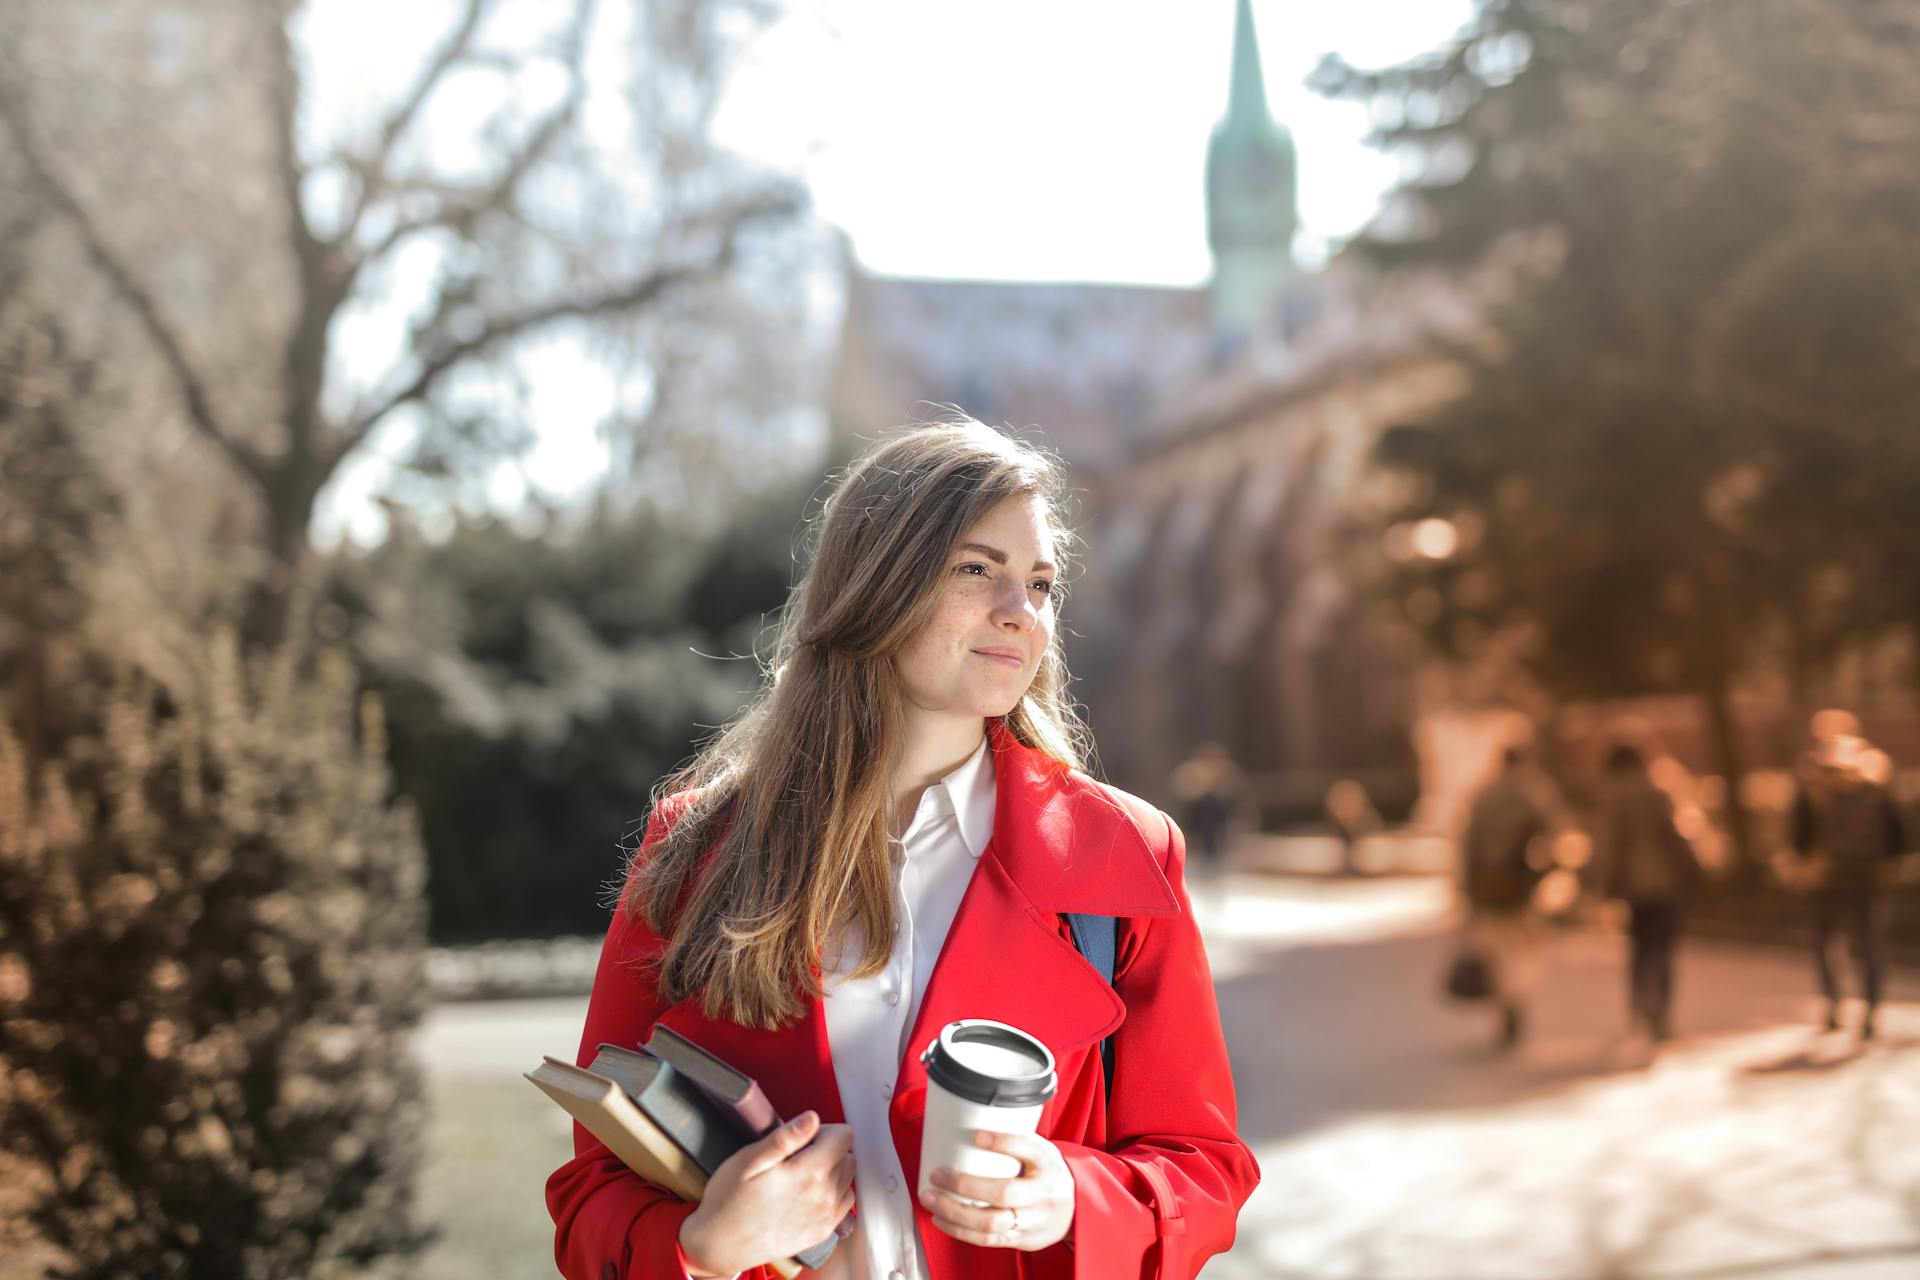 A woman in a red coat | Source: Pexels